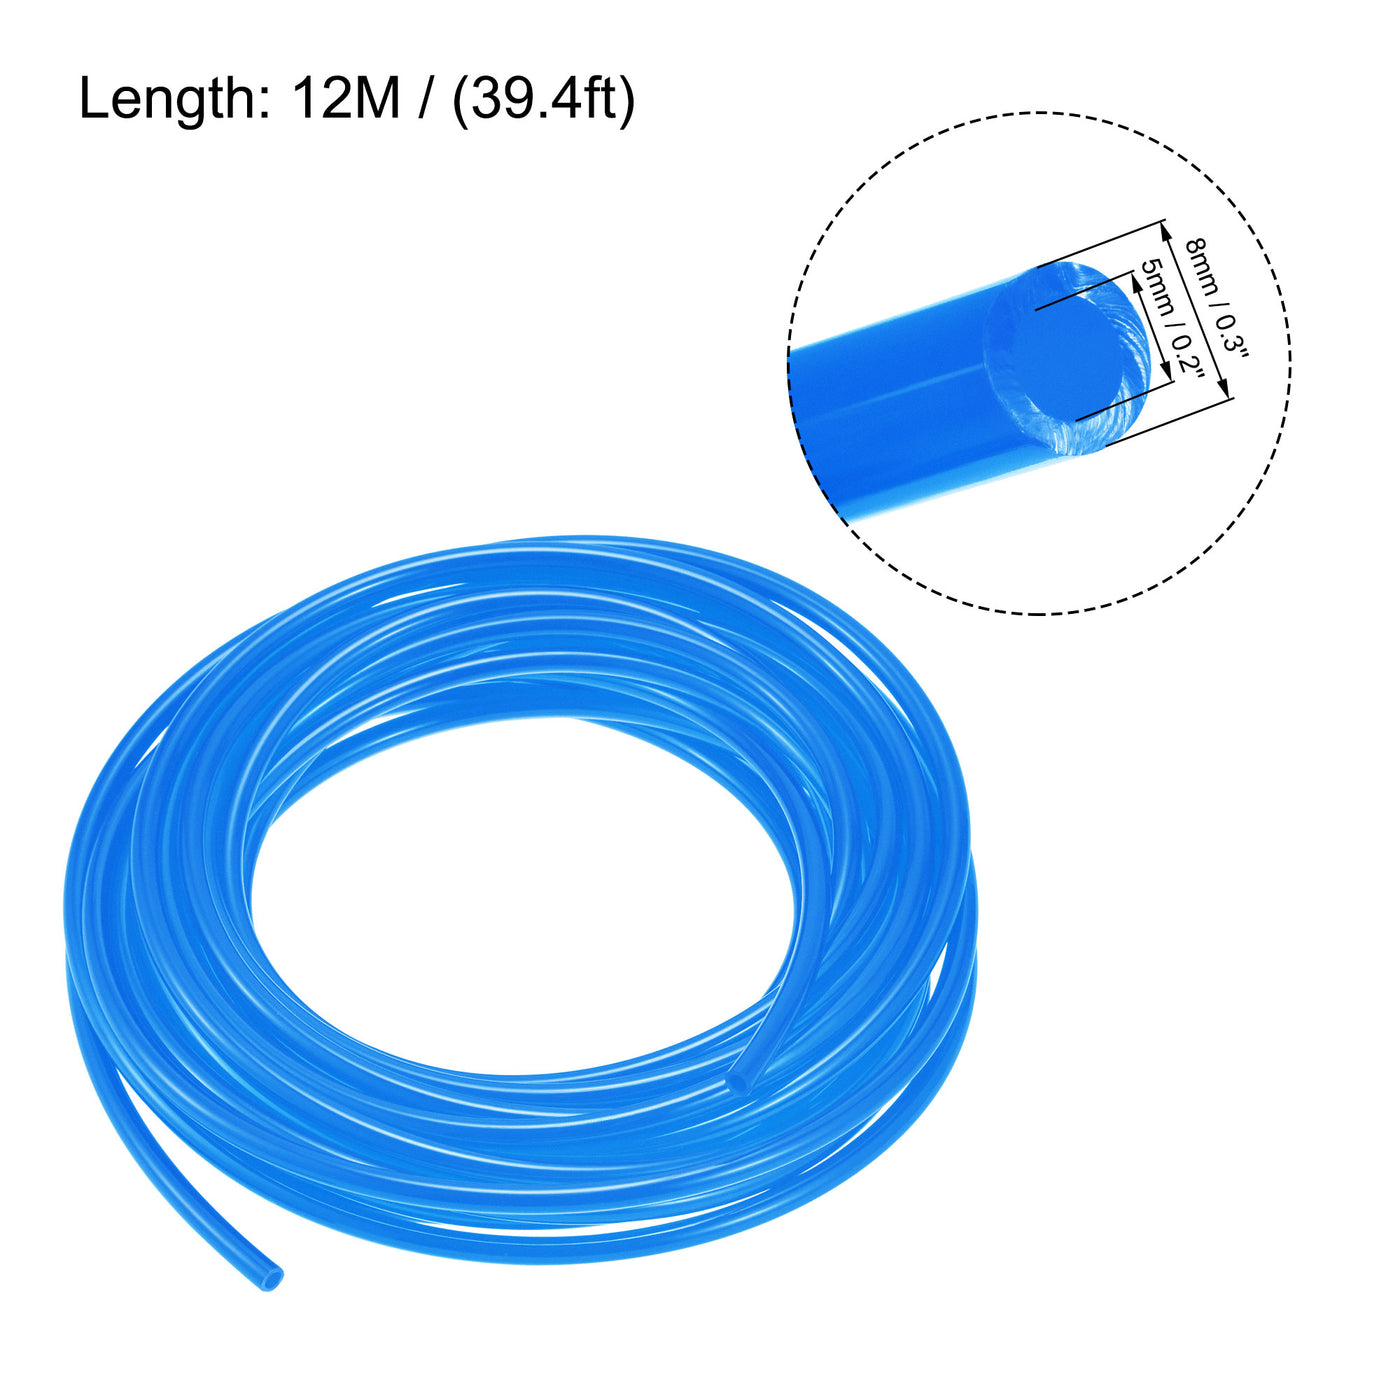 uxcell Uxcell Pneumatic Air Hose Tubing Air Compressor Tube 5mm/0.2''ID x 8mm/0.3''OD x 12m/39.4Ft Polyurethane Pipe Blue